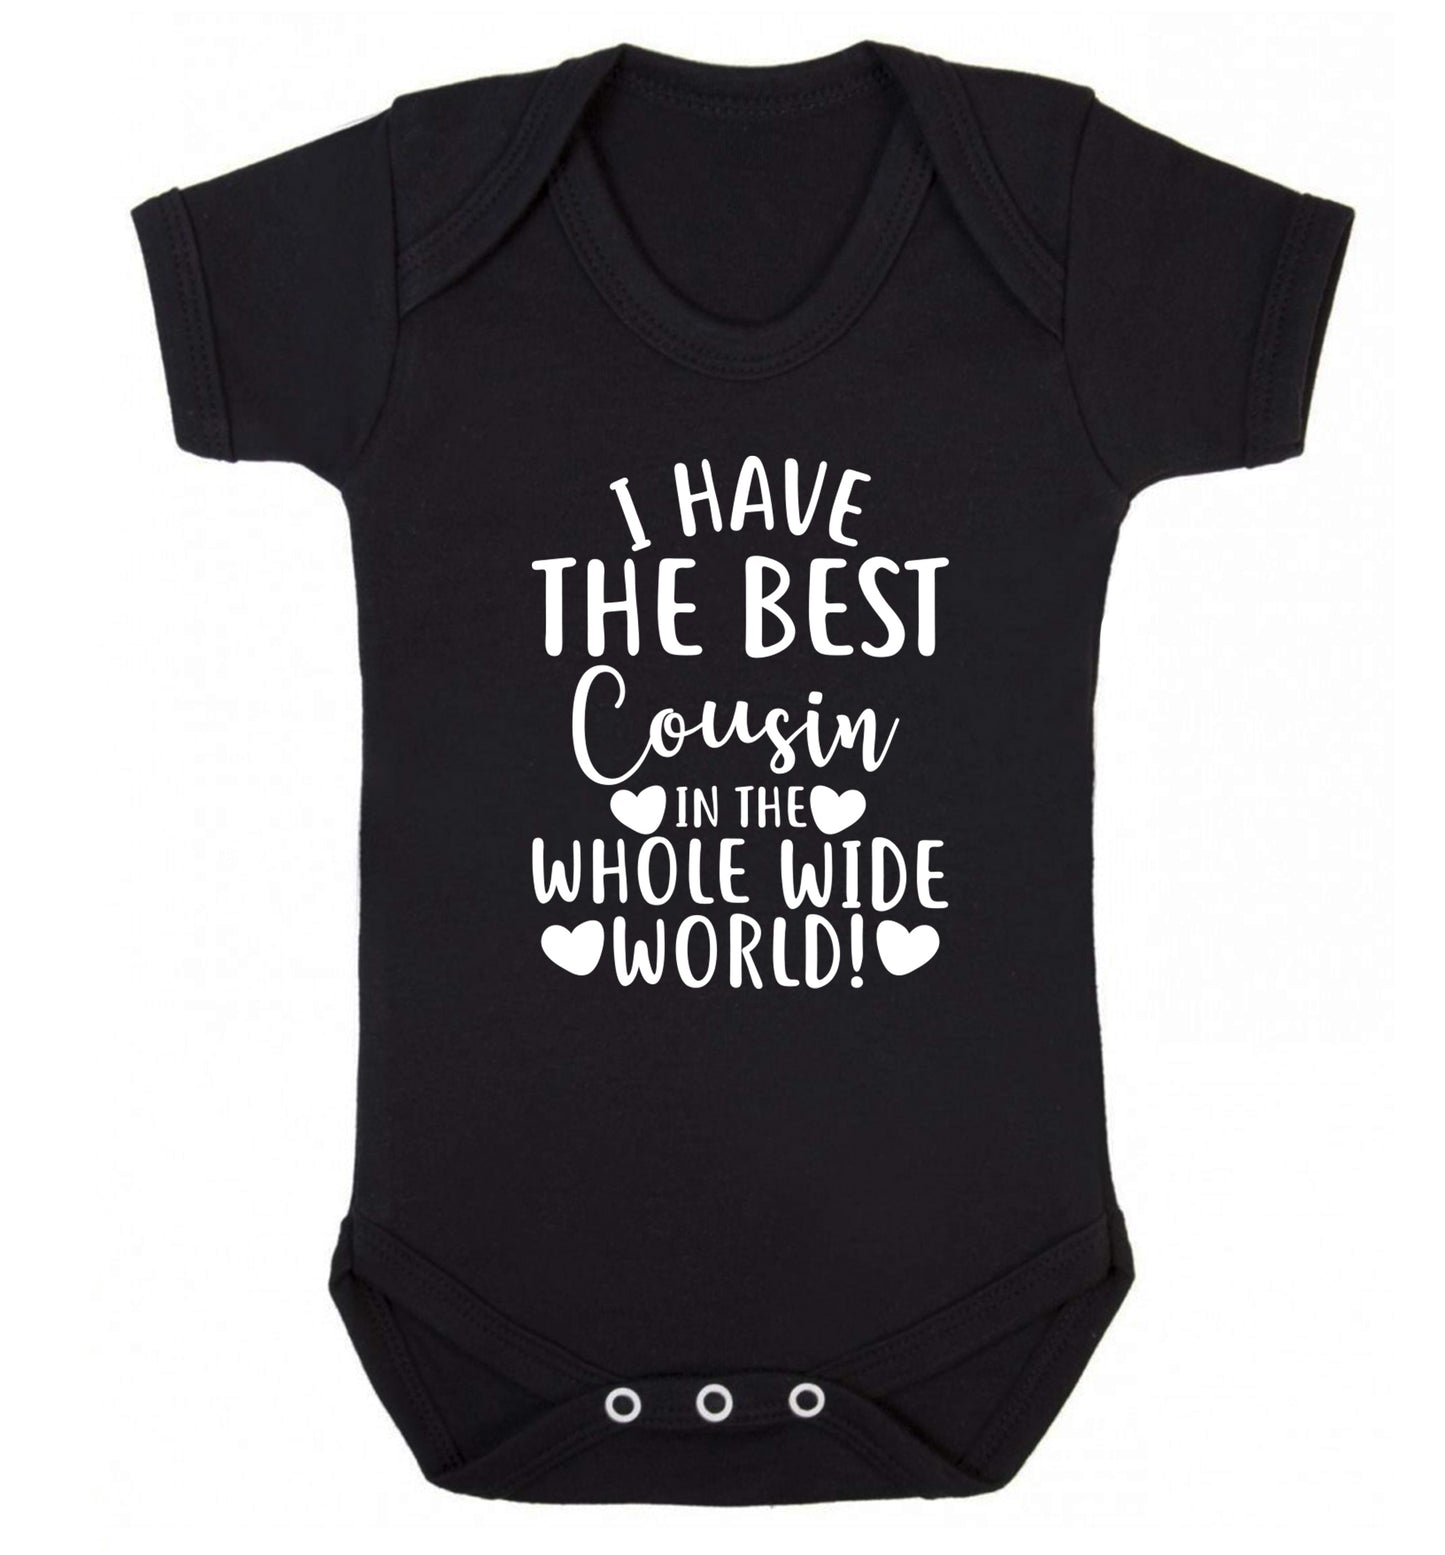 I have the best cousin in the whole wide world! Baby Vest black 18-24 months